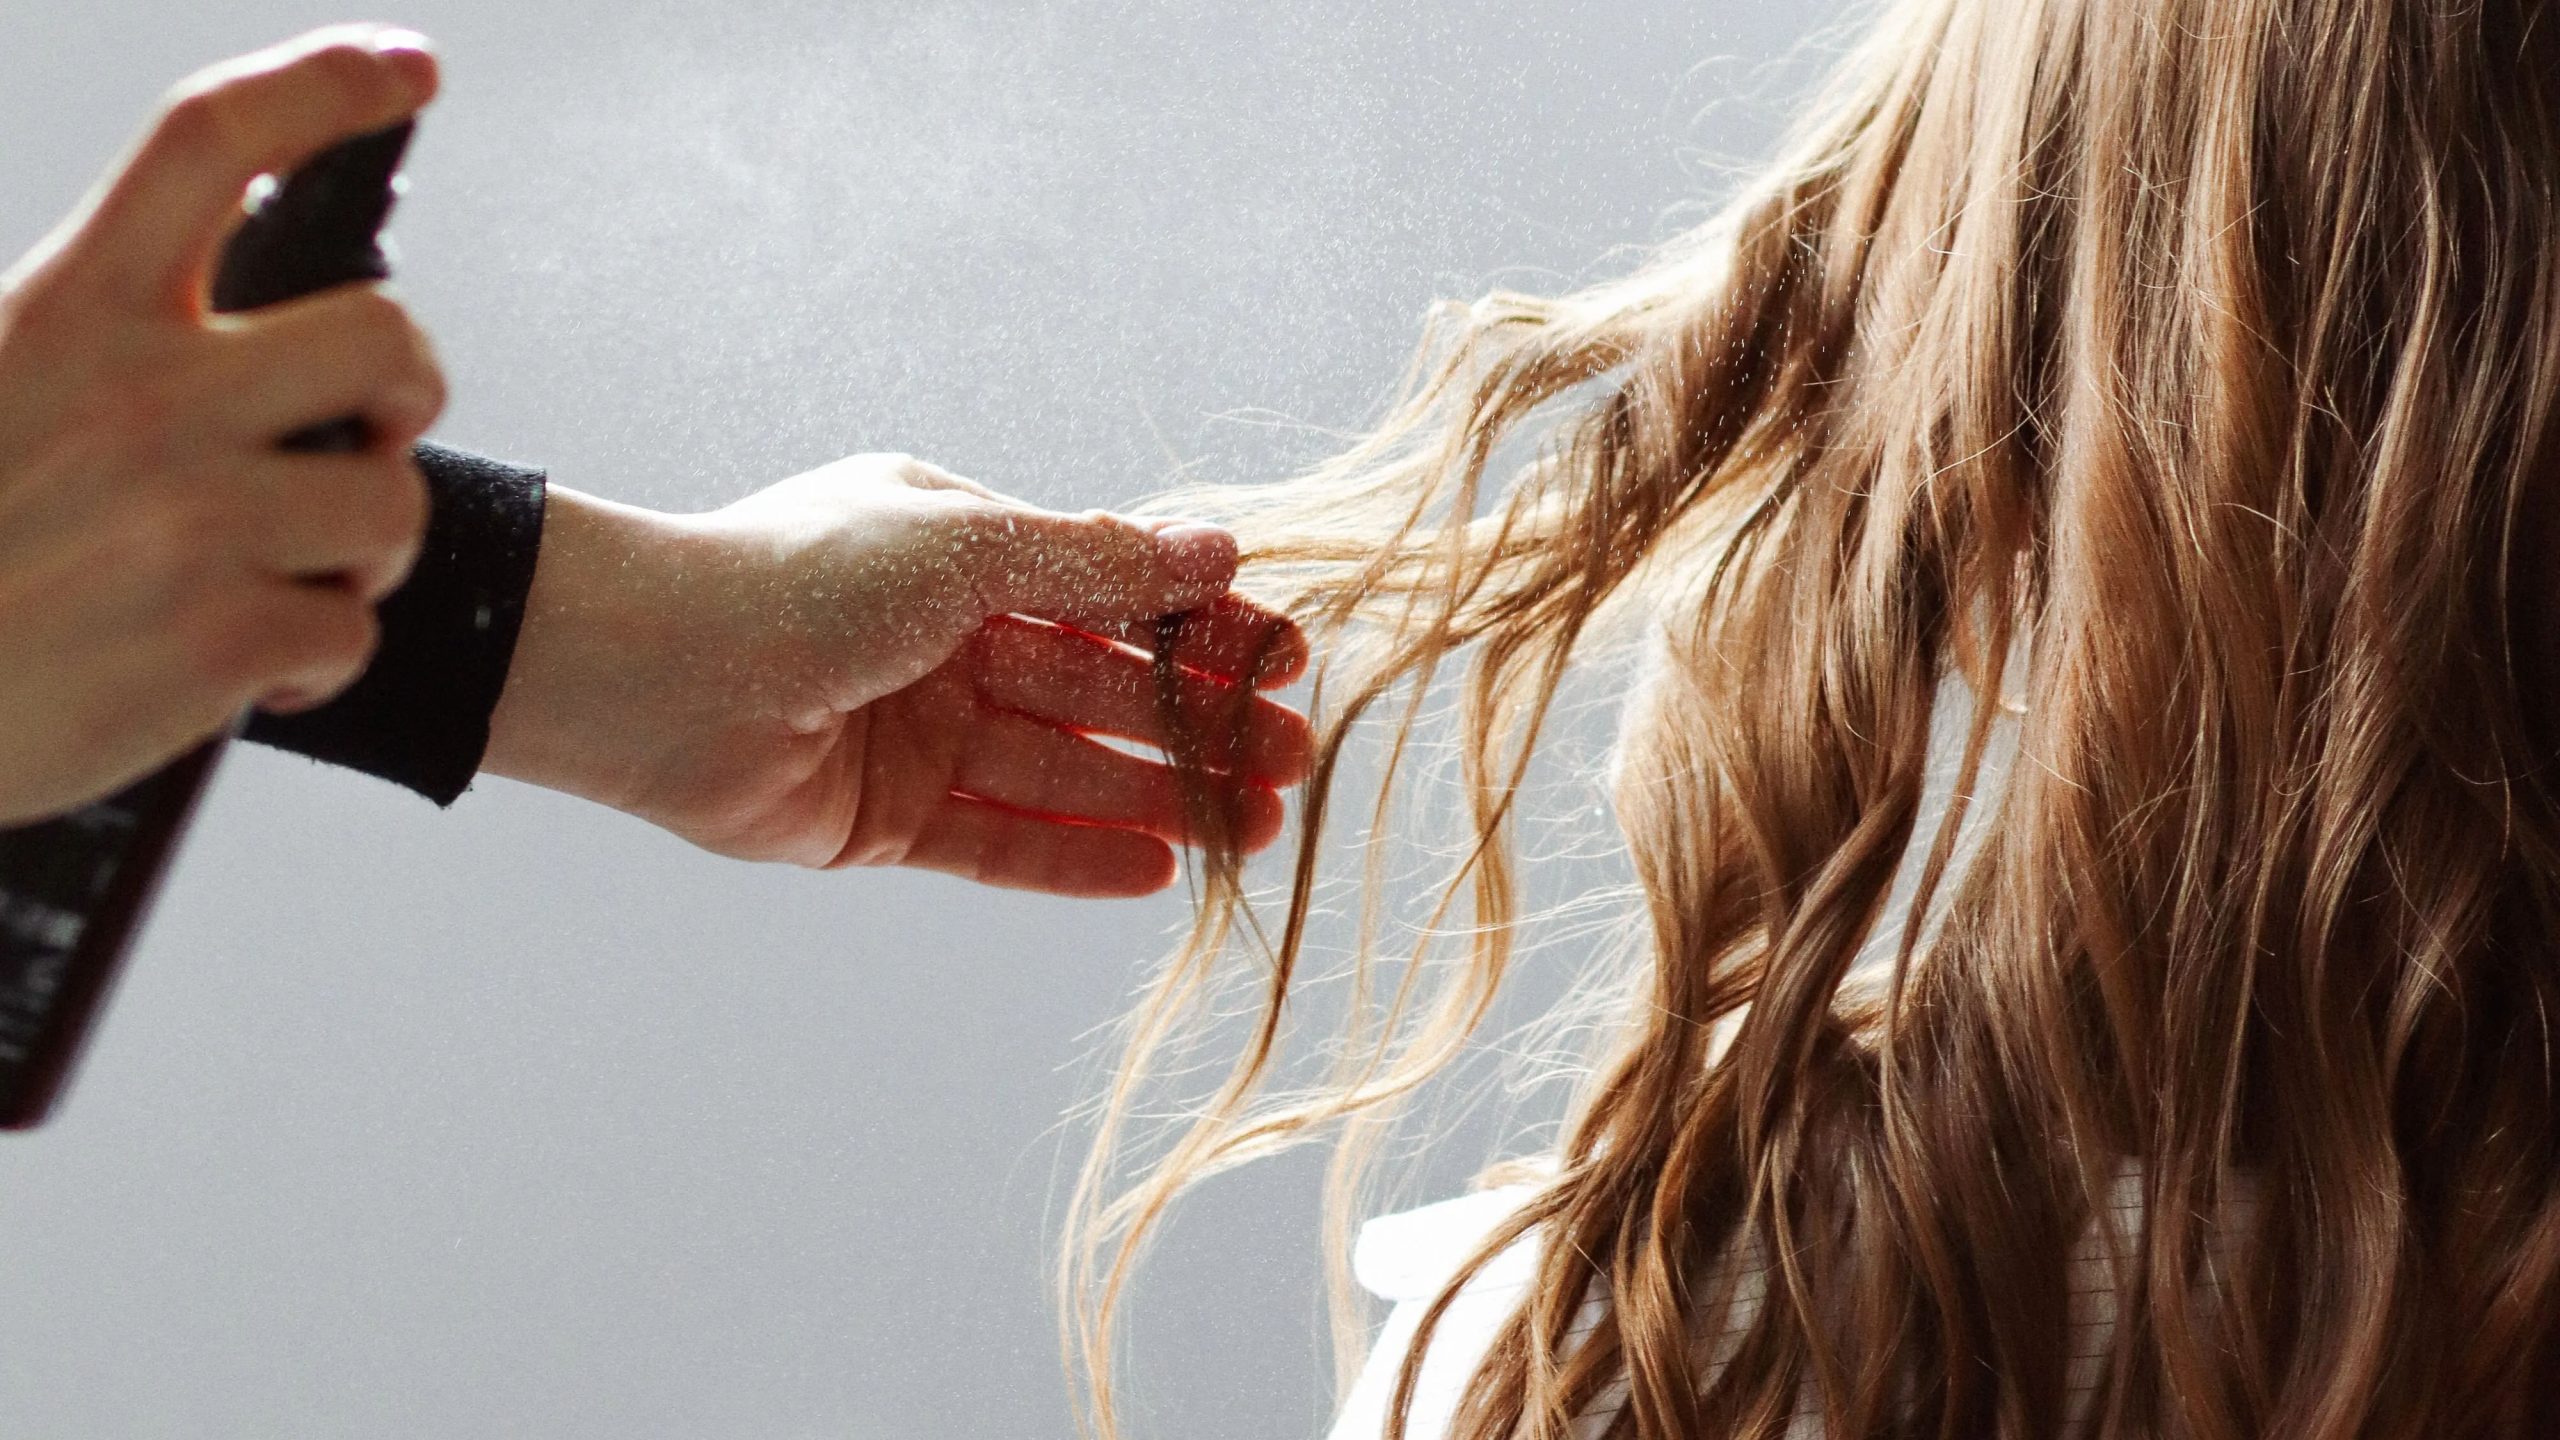 Hair fall remedies: Try this simple DIY spray for long, shiny hair